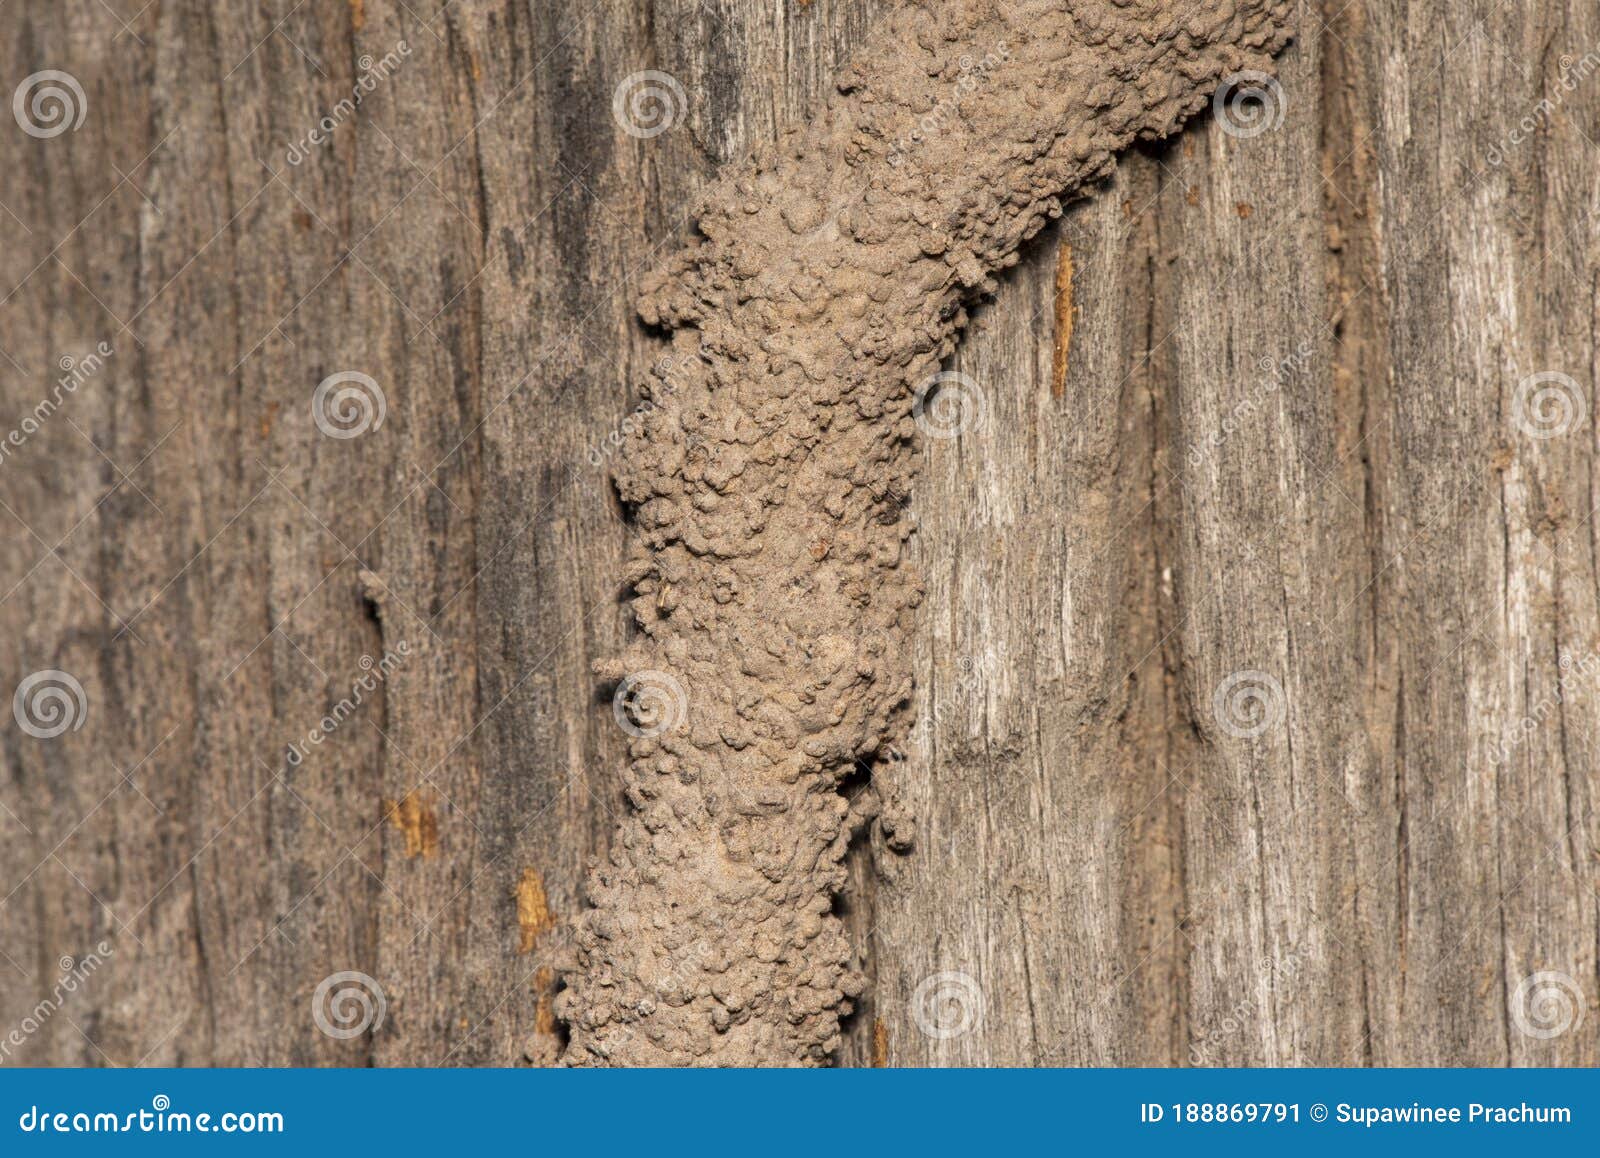 Traces of Termites Eat Wood,animals that Destroy Wood Stock Image - Image  of traces, background: 188869791